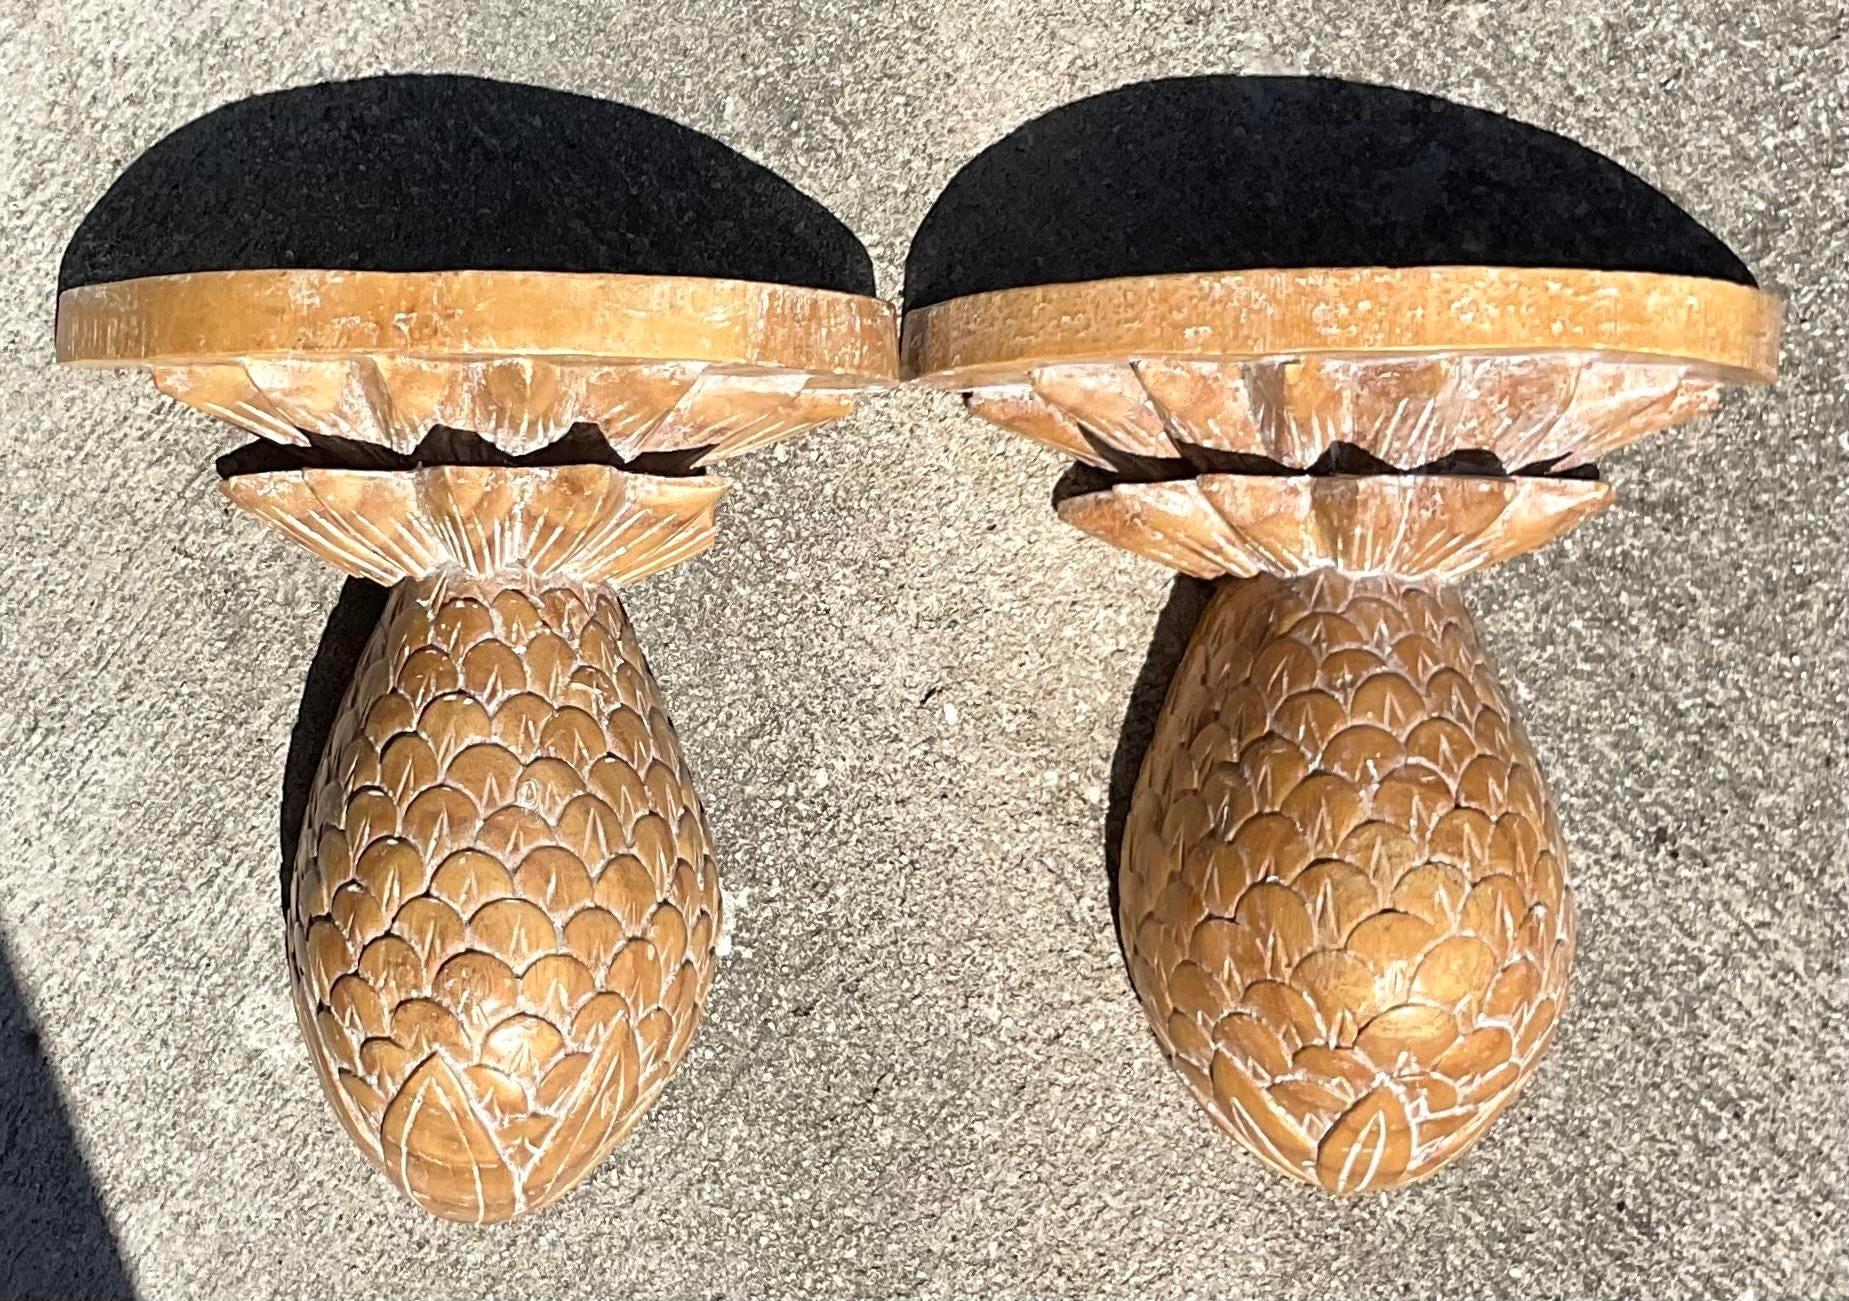 Add a touch of tropical elegance with this pair of vintage Regency washed wood pineapple brackets. American-crafted with intricate detailing, these brackets serve as both functional and decorative elements, bringing a hint of island-inspired charm